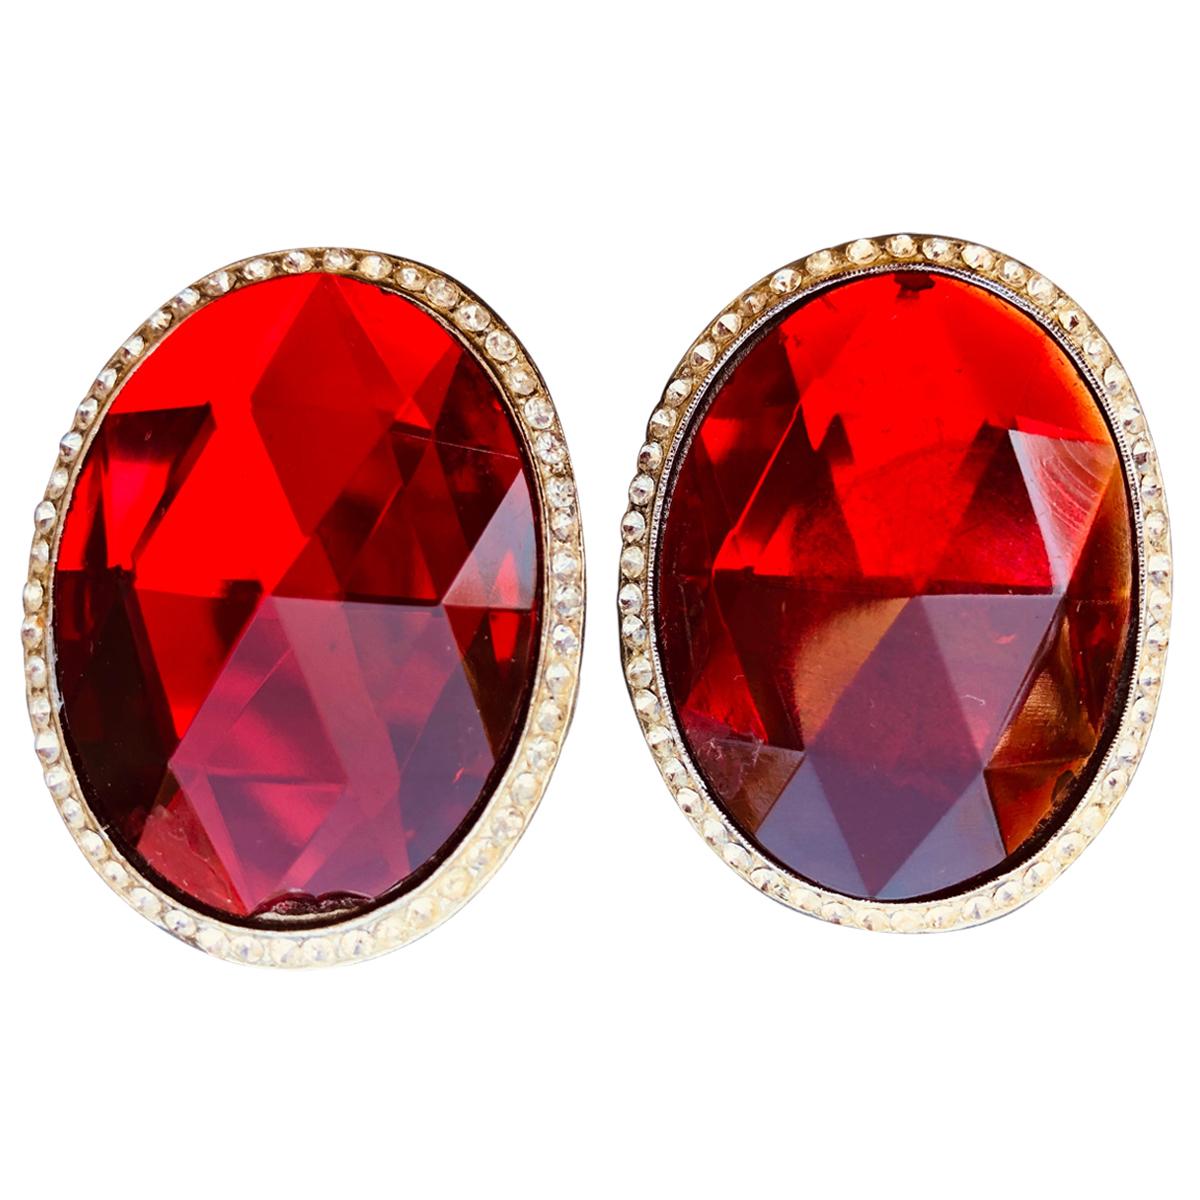 Richard Serbin 1984 Huge Oval Runway Clip On Earrings with Red "Crystal" For Sale